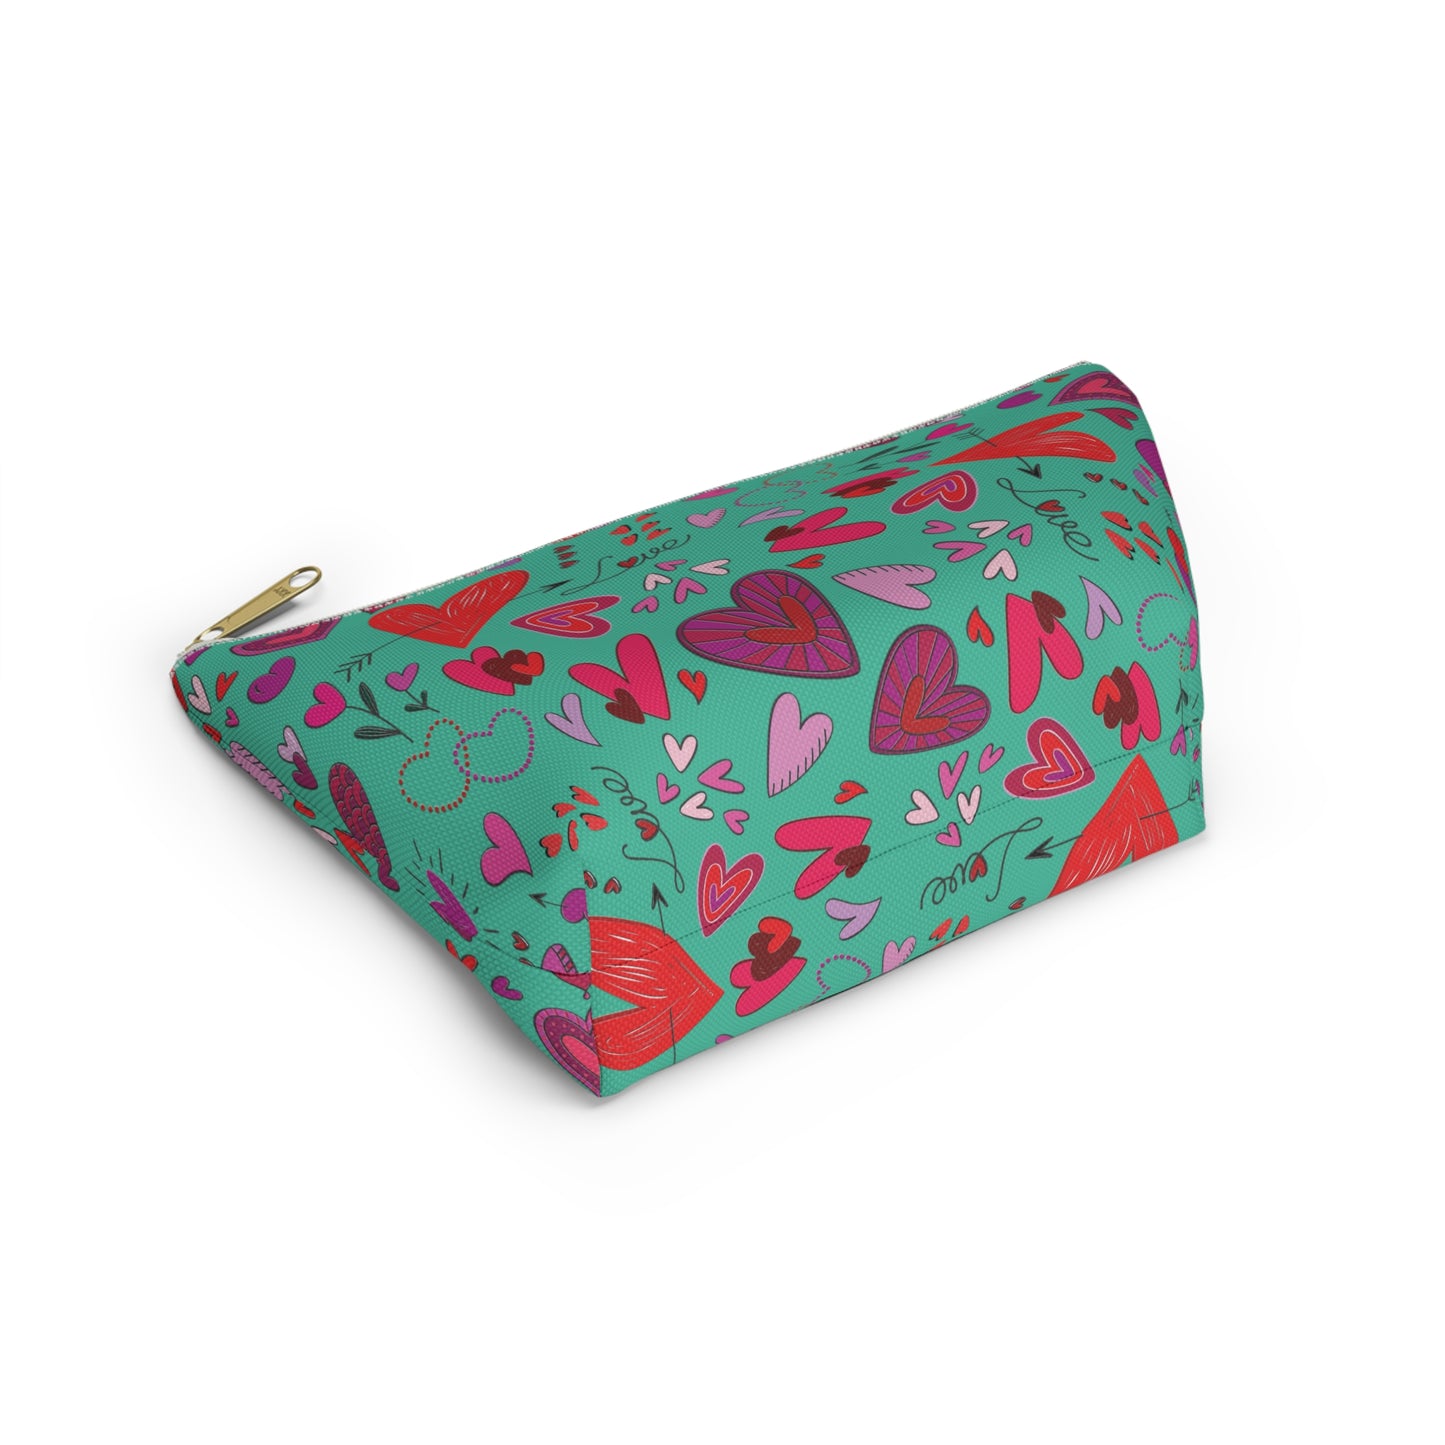 Heart doodles - Turquoise 12d3ad - Accessory Pouch w T-bottom